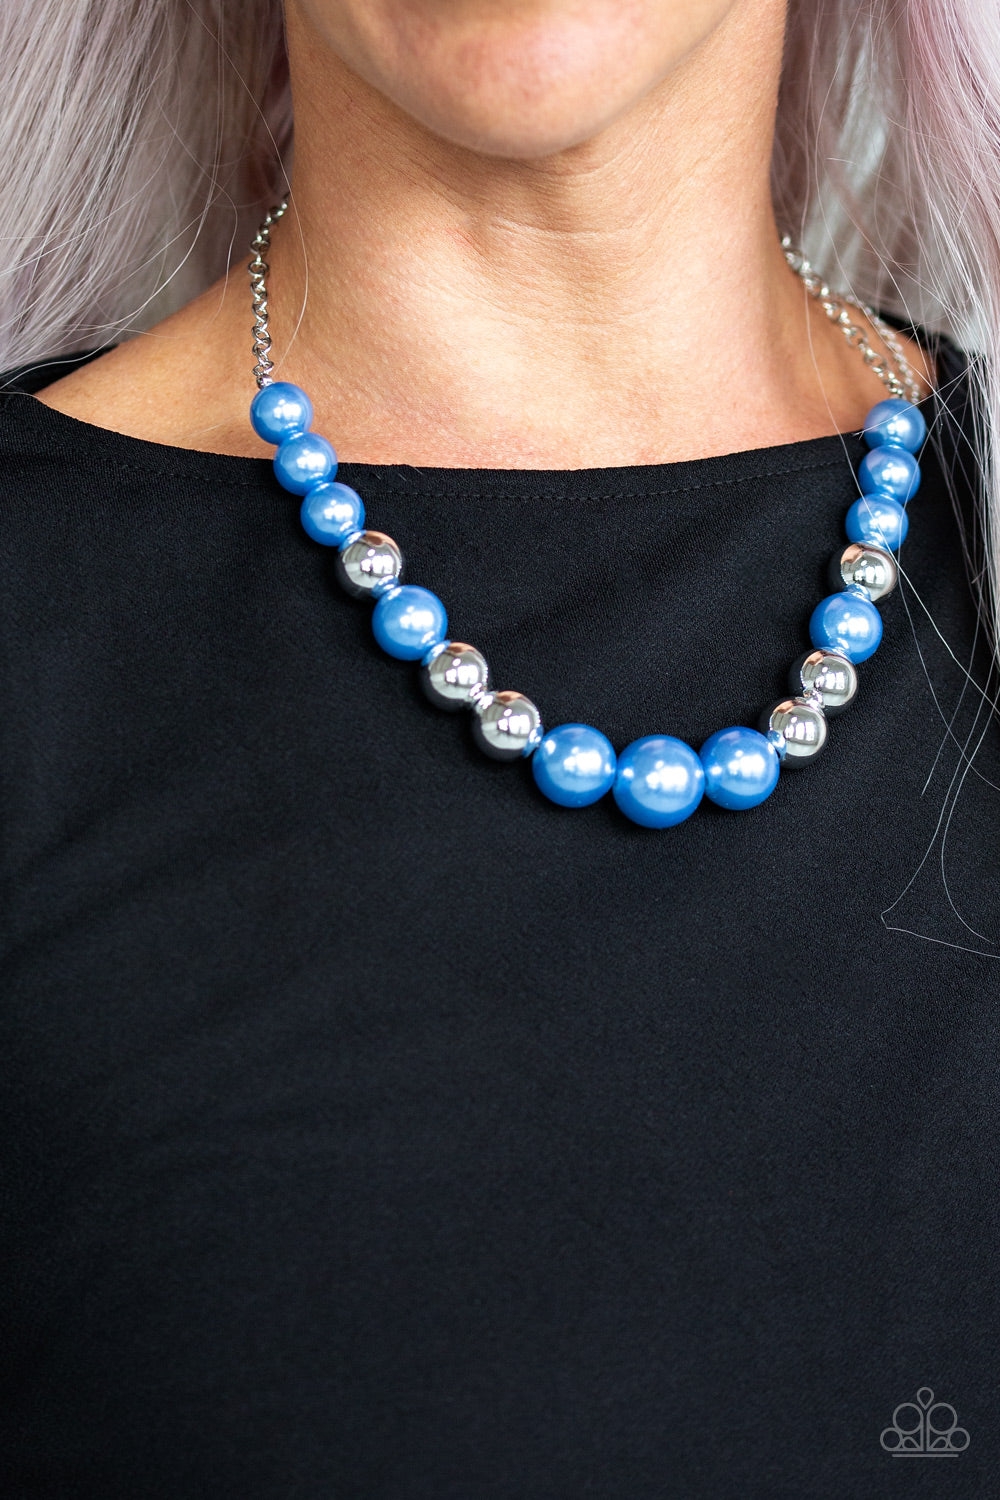 Take Note - Blue Necklace